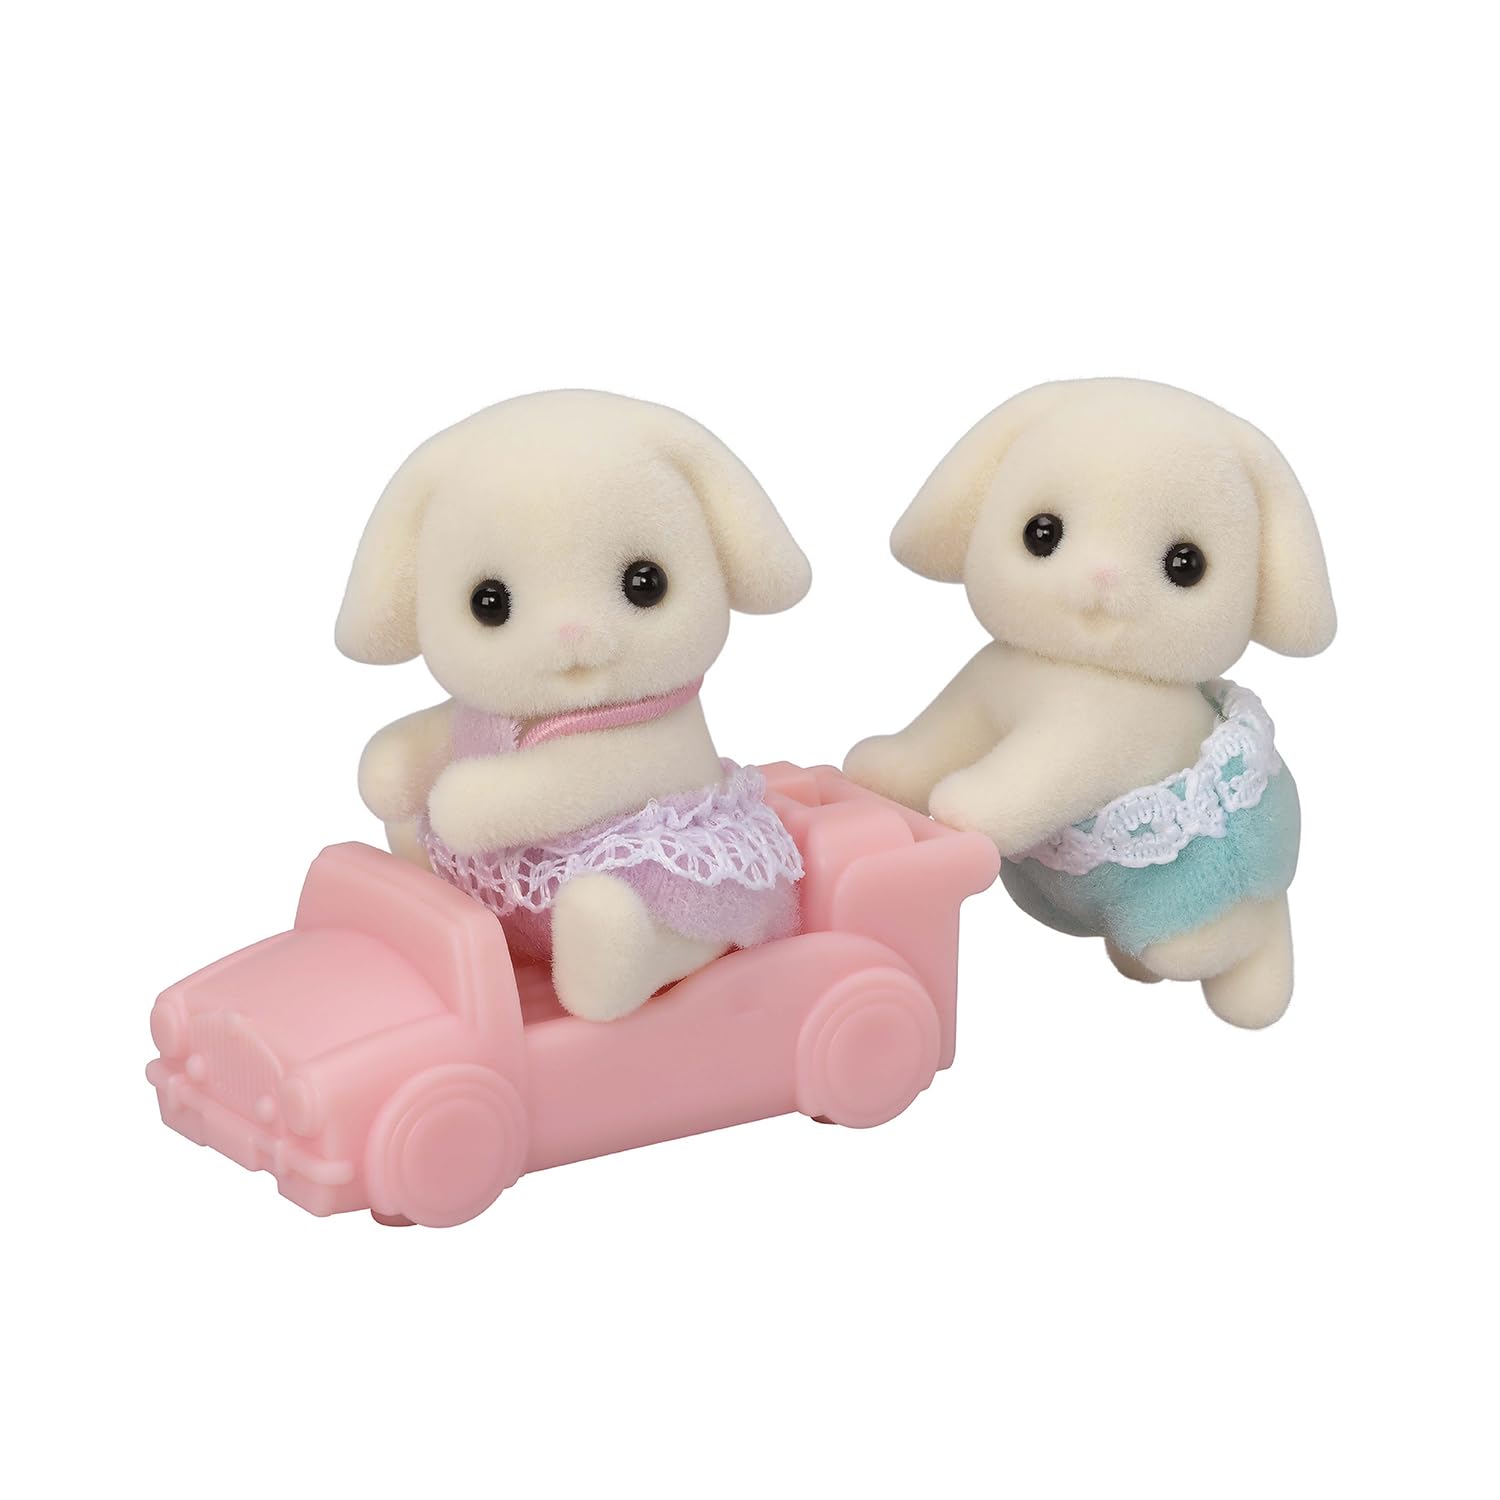 Calico Critters Flora Rabbit Twins - Set of 2 Collectible Doll Figures for Ages 3+